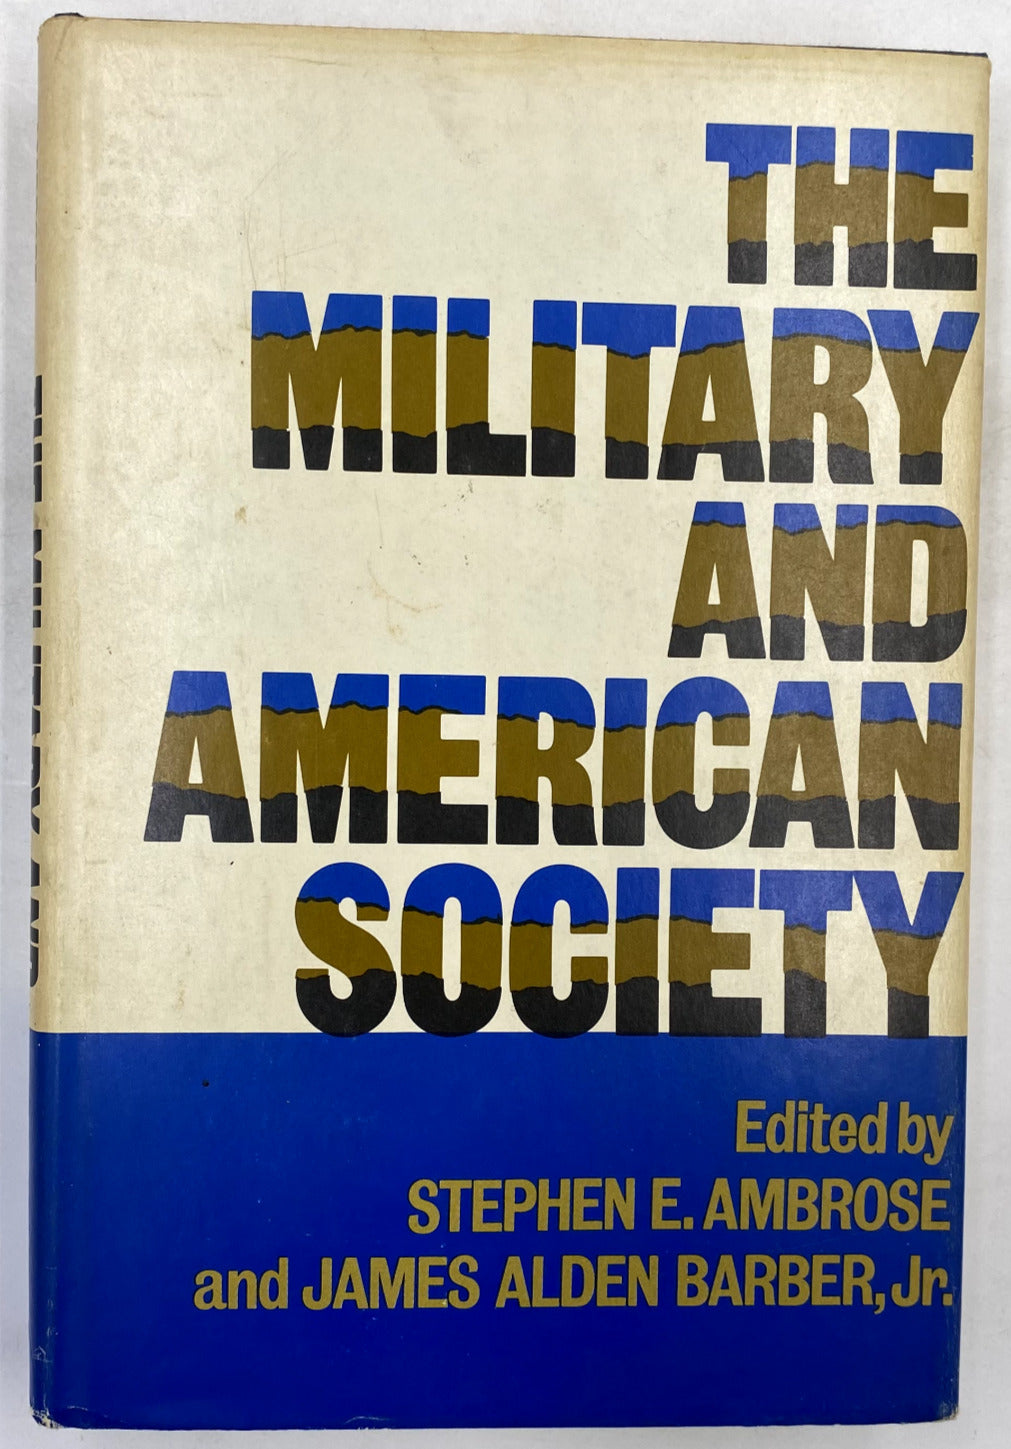 The Military and American Society edited by Stephen E. Ambrose/James A. Barber